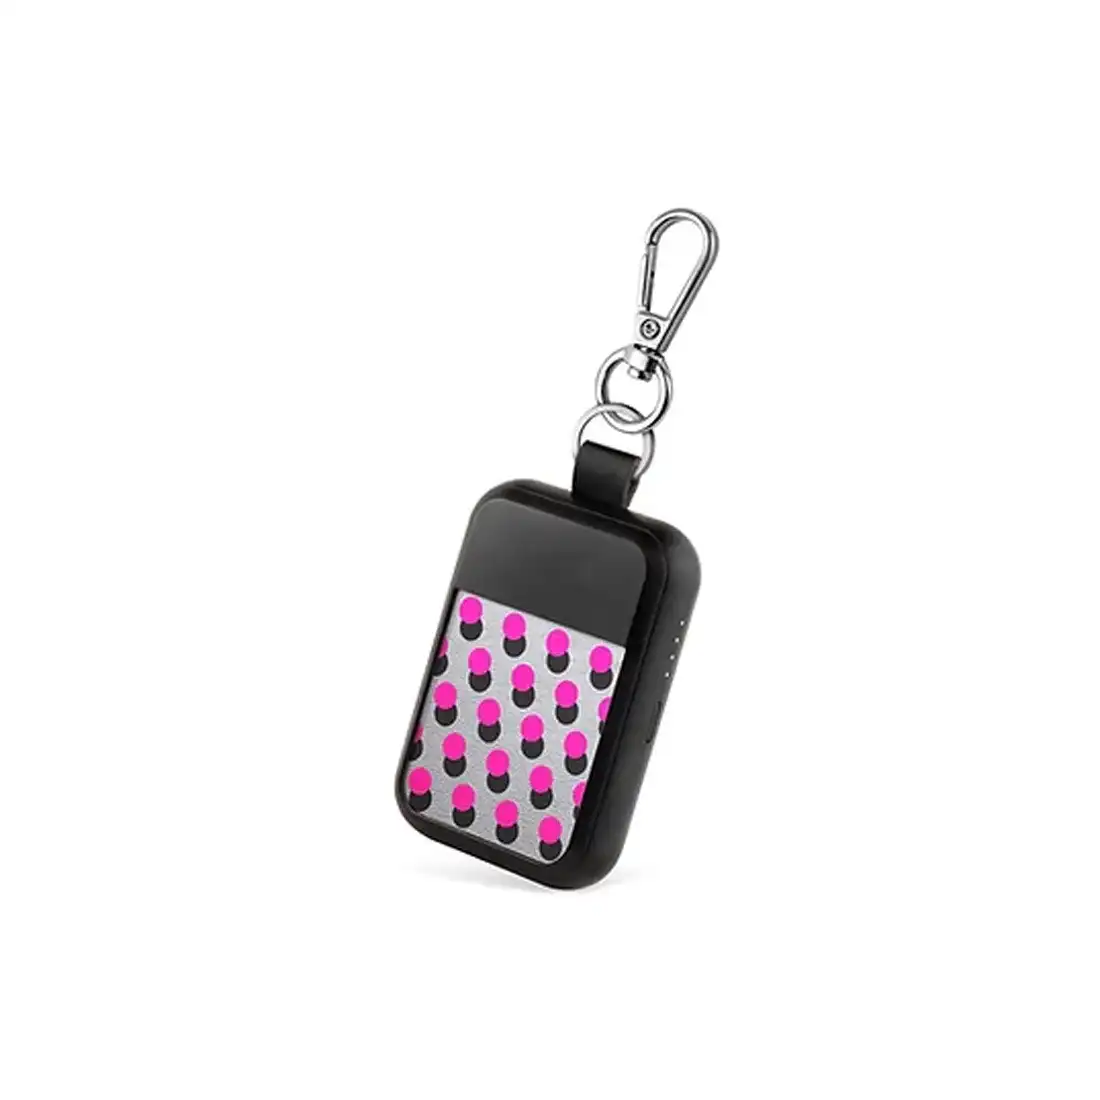 Wipop Keywi Two Wireless Keyring Charger Mini Power Bank - Abstract Dots